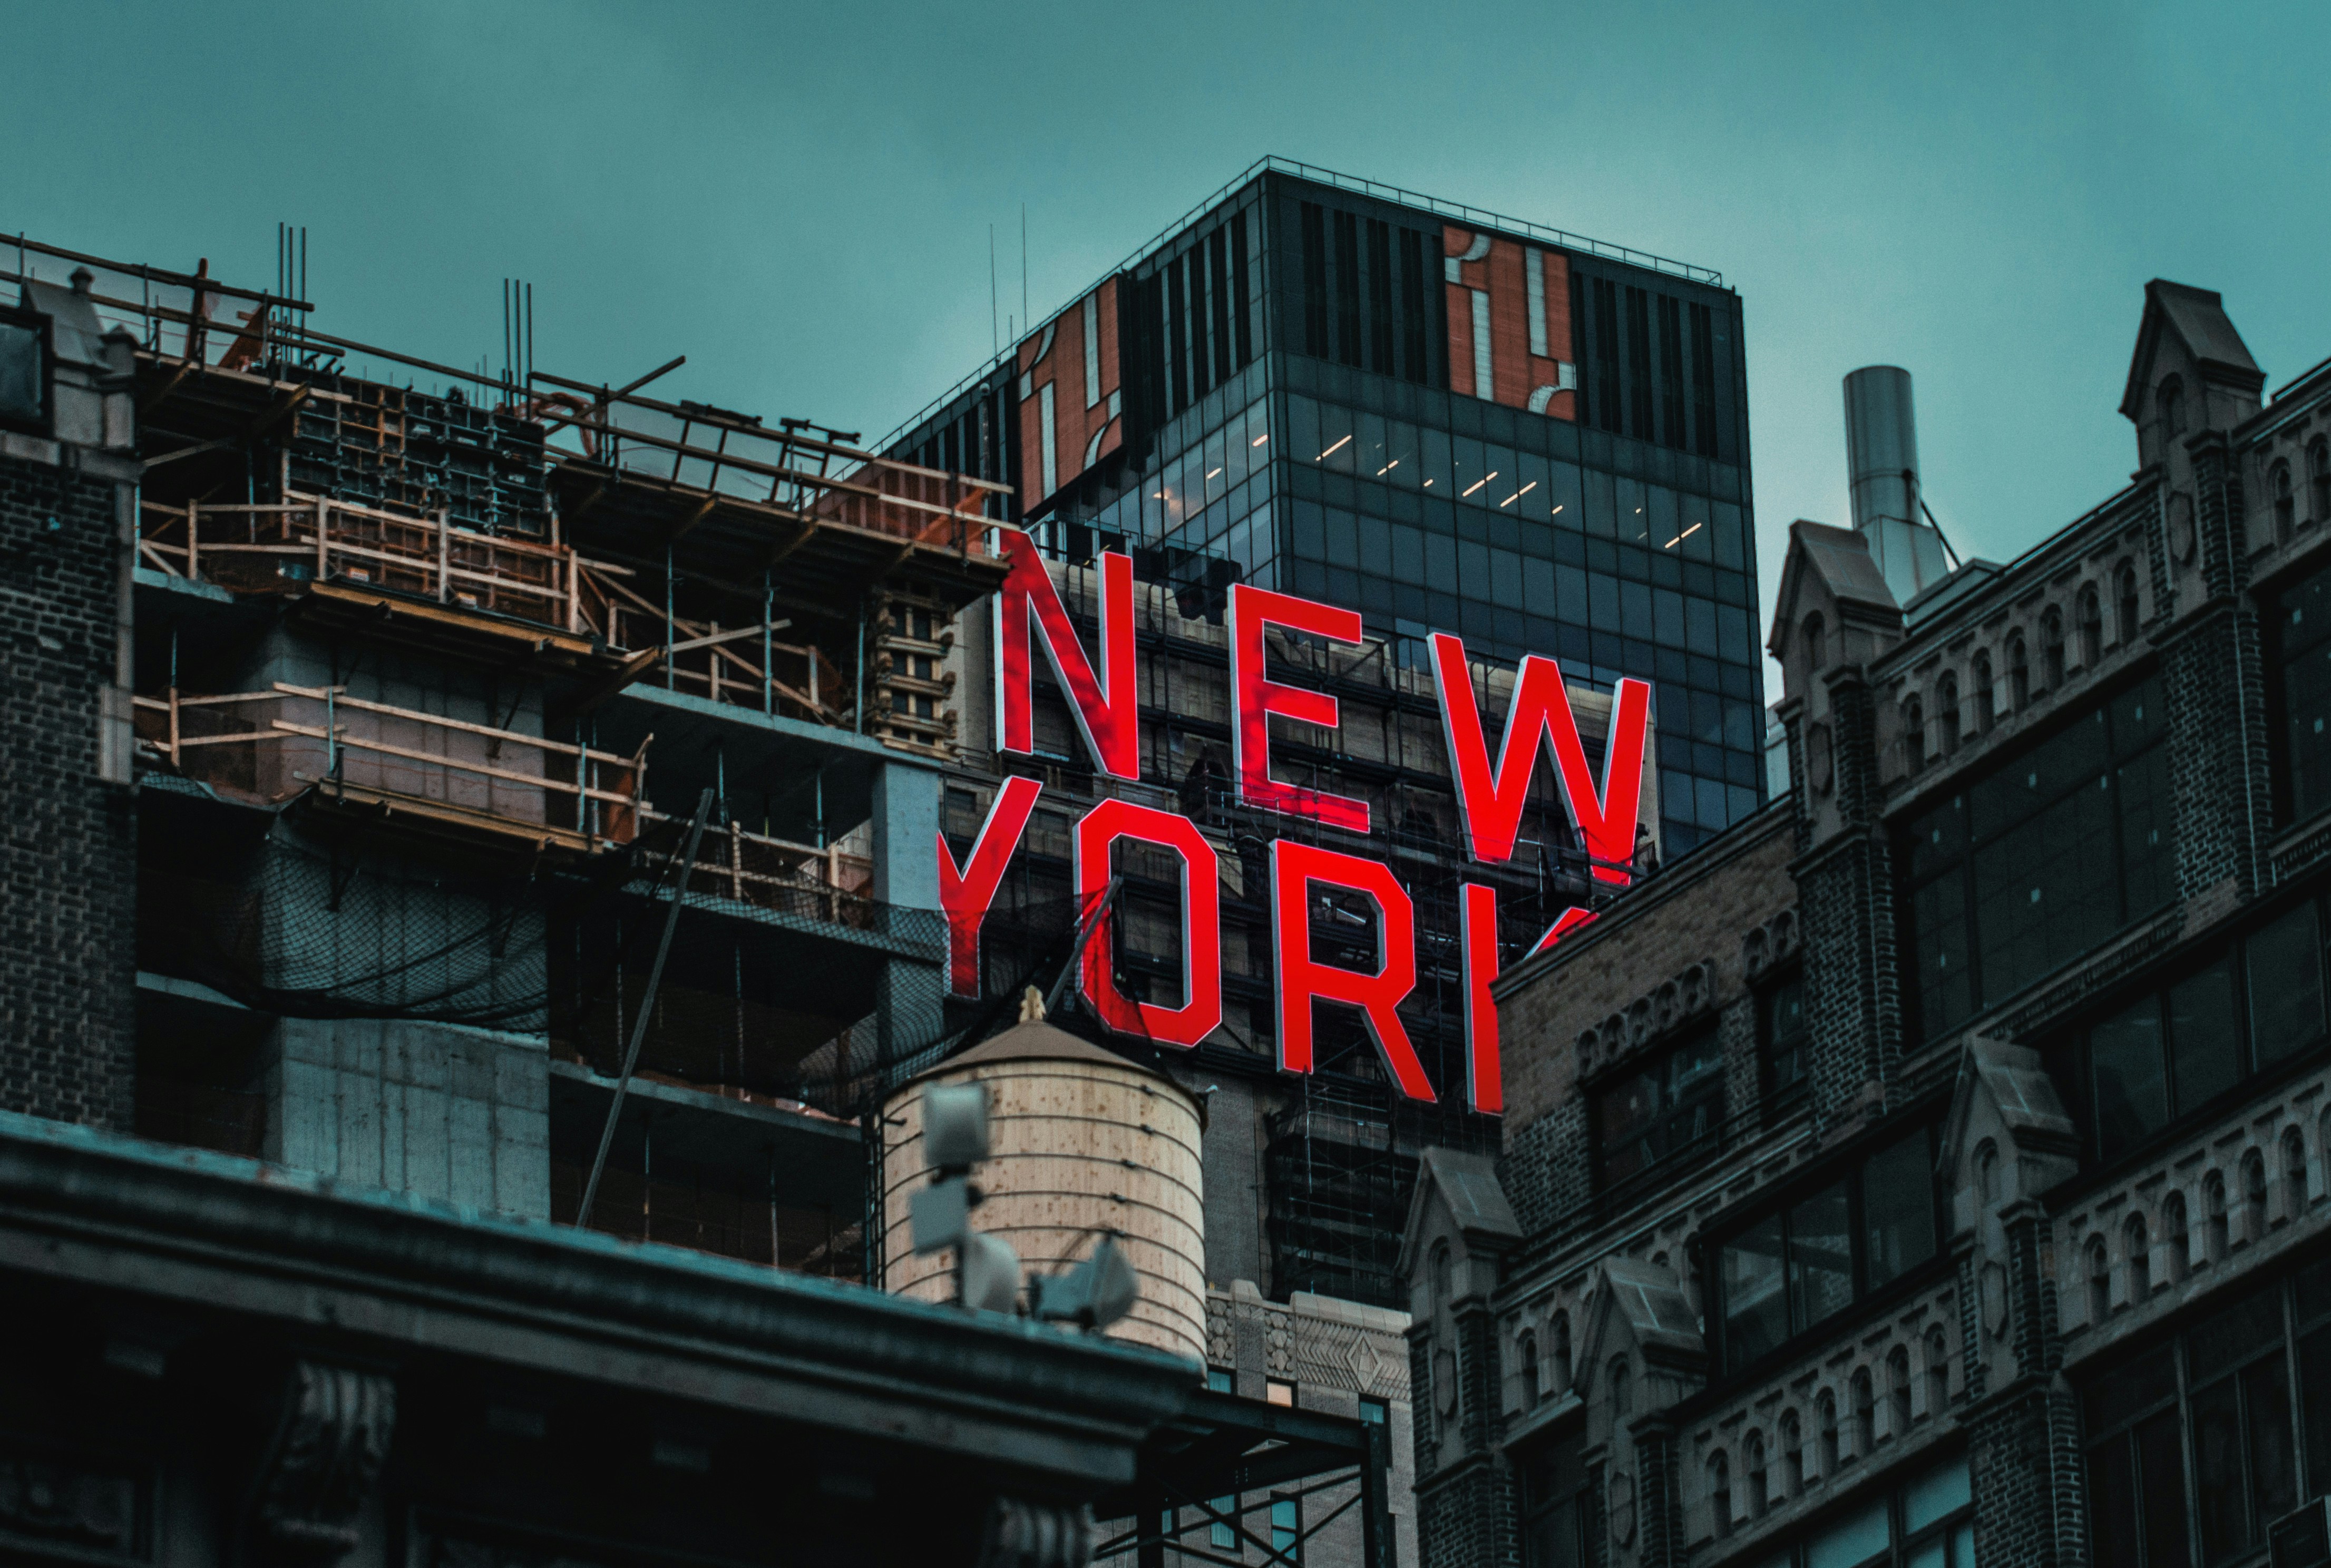 New York letters